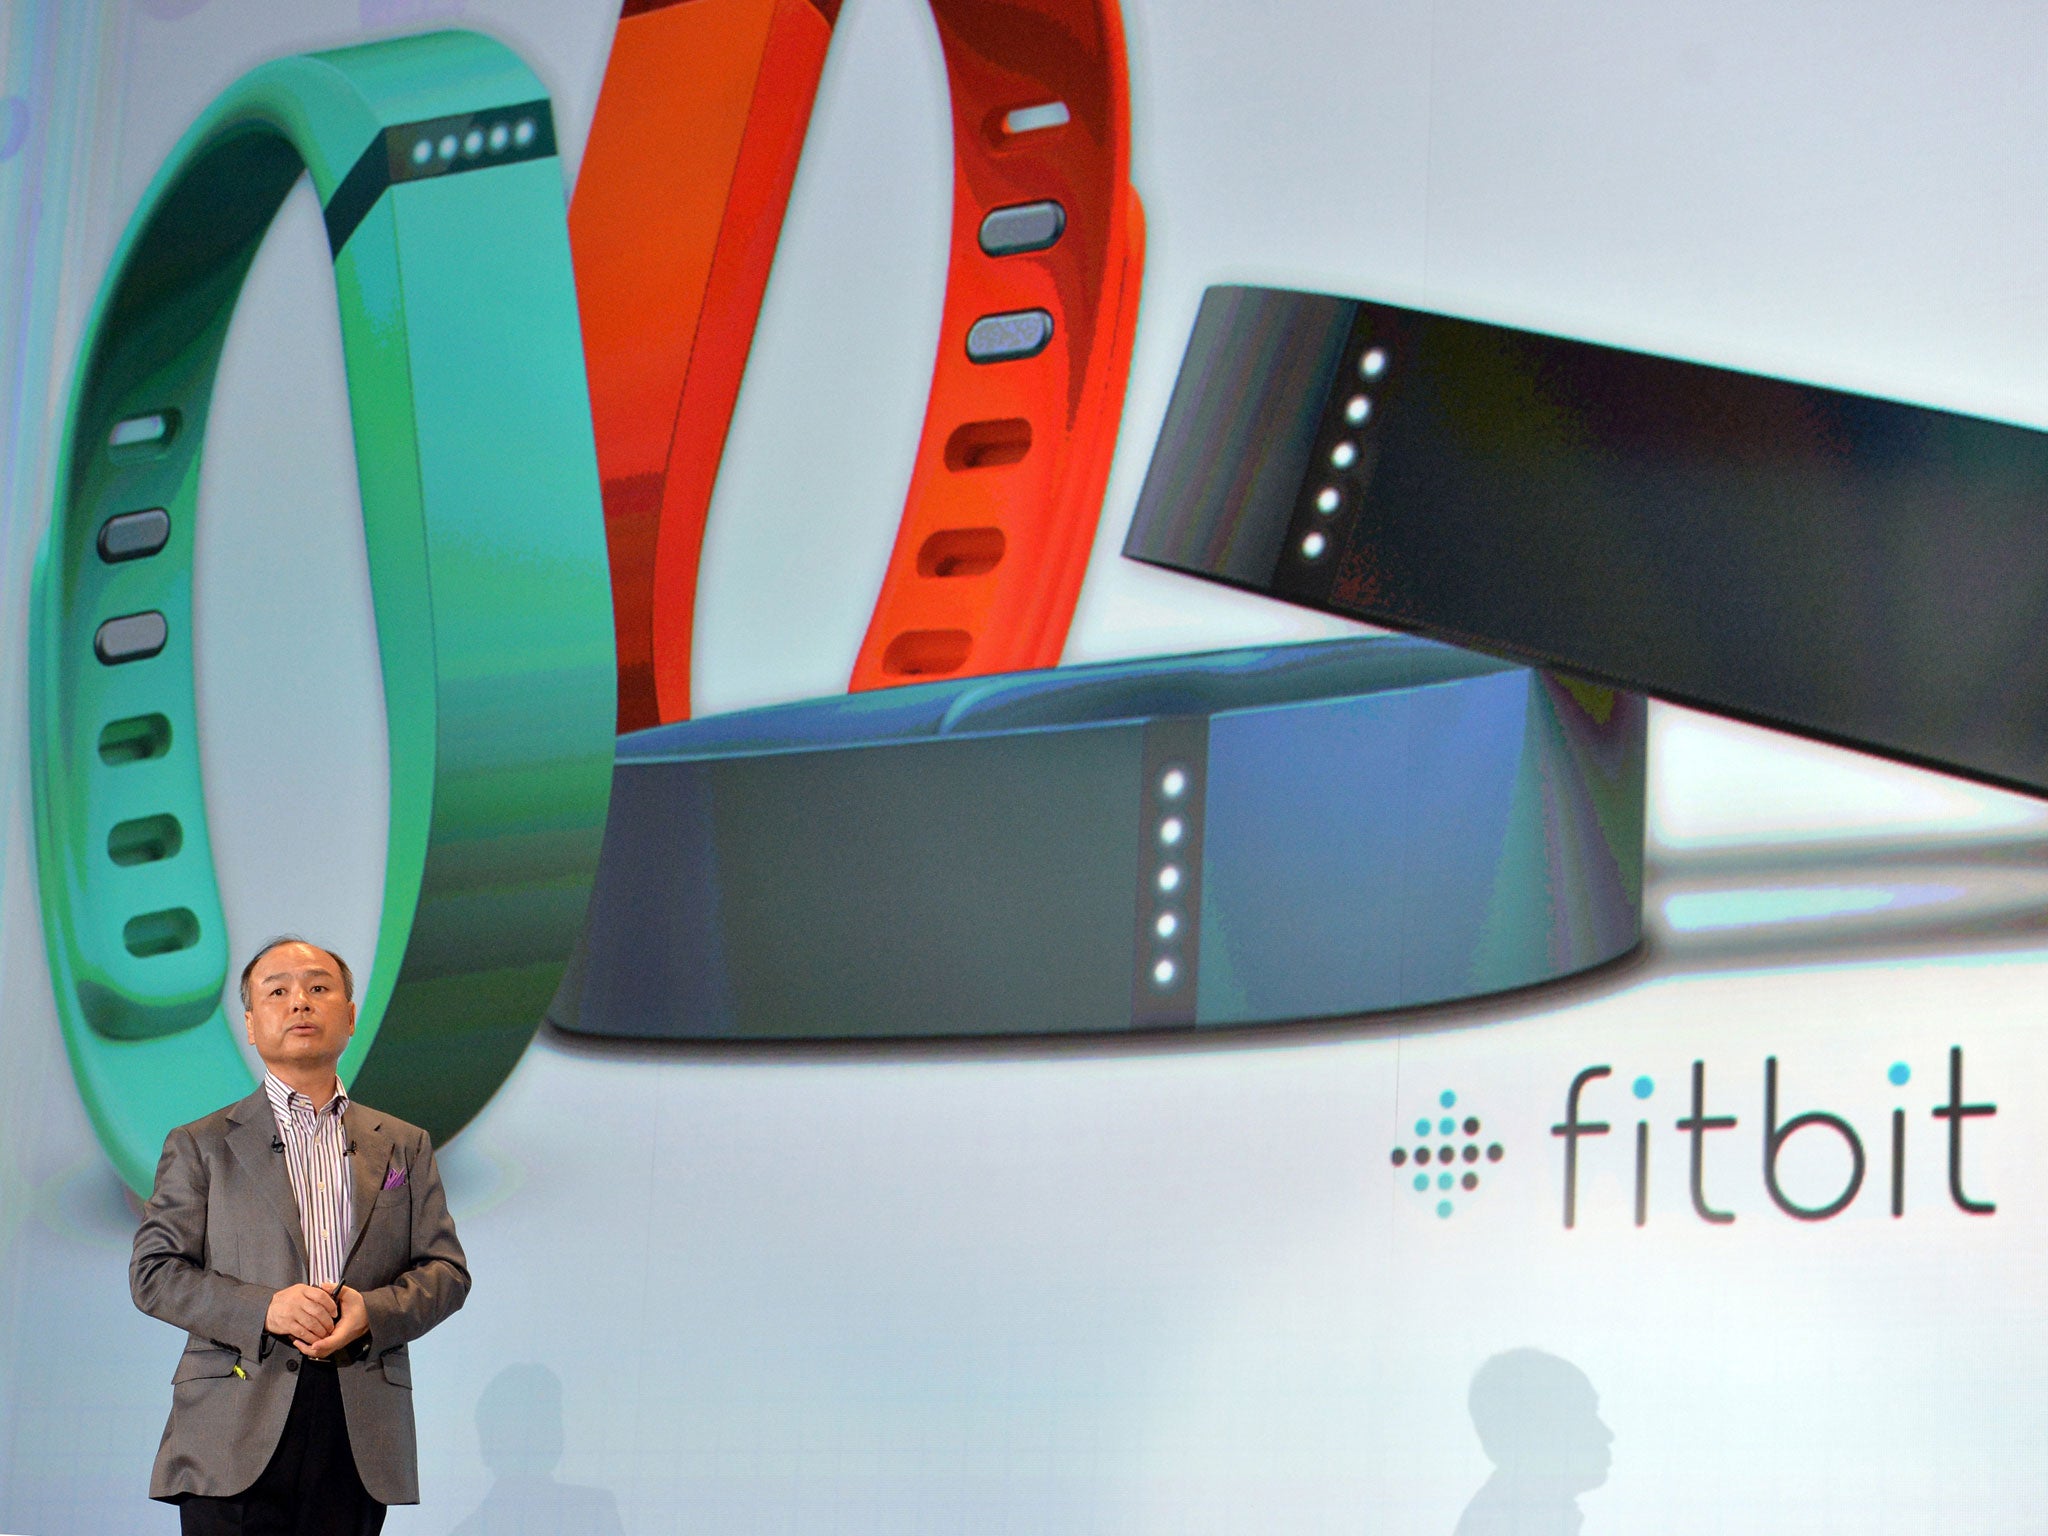 Ever since the launch of the first Fitbit fitness tracker in 2009, wearable technology has been touted as the next big thing